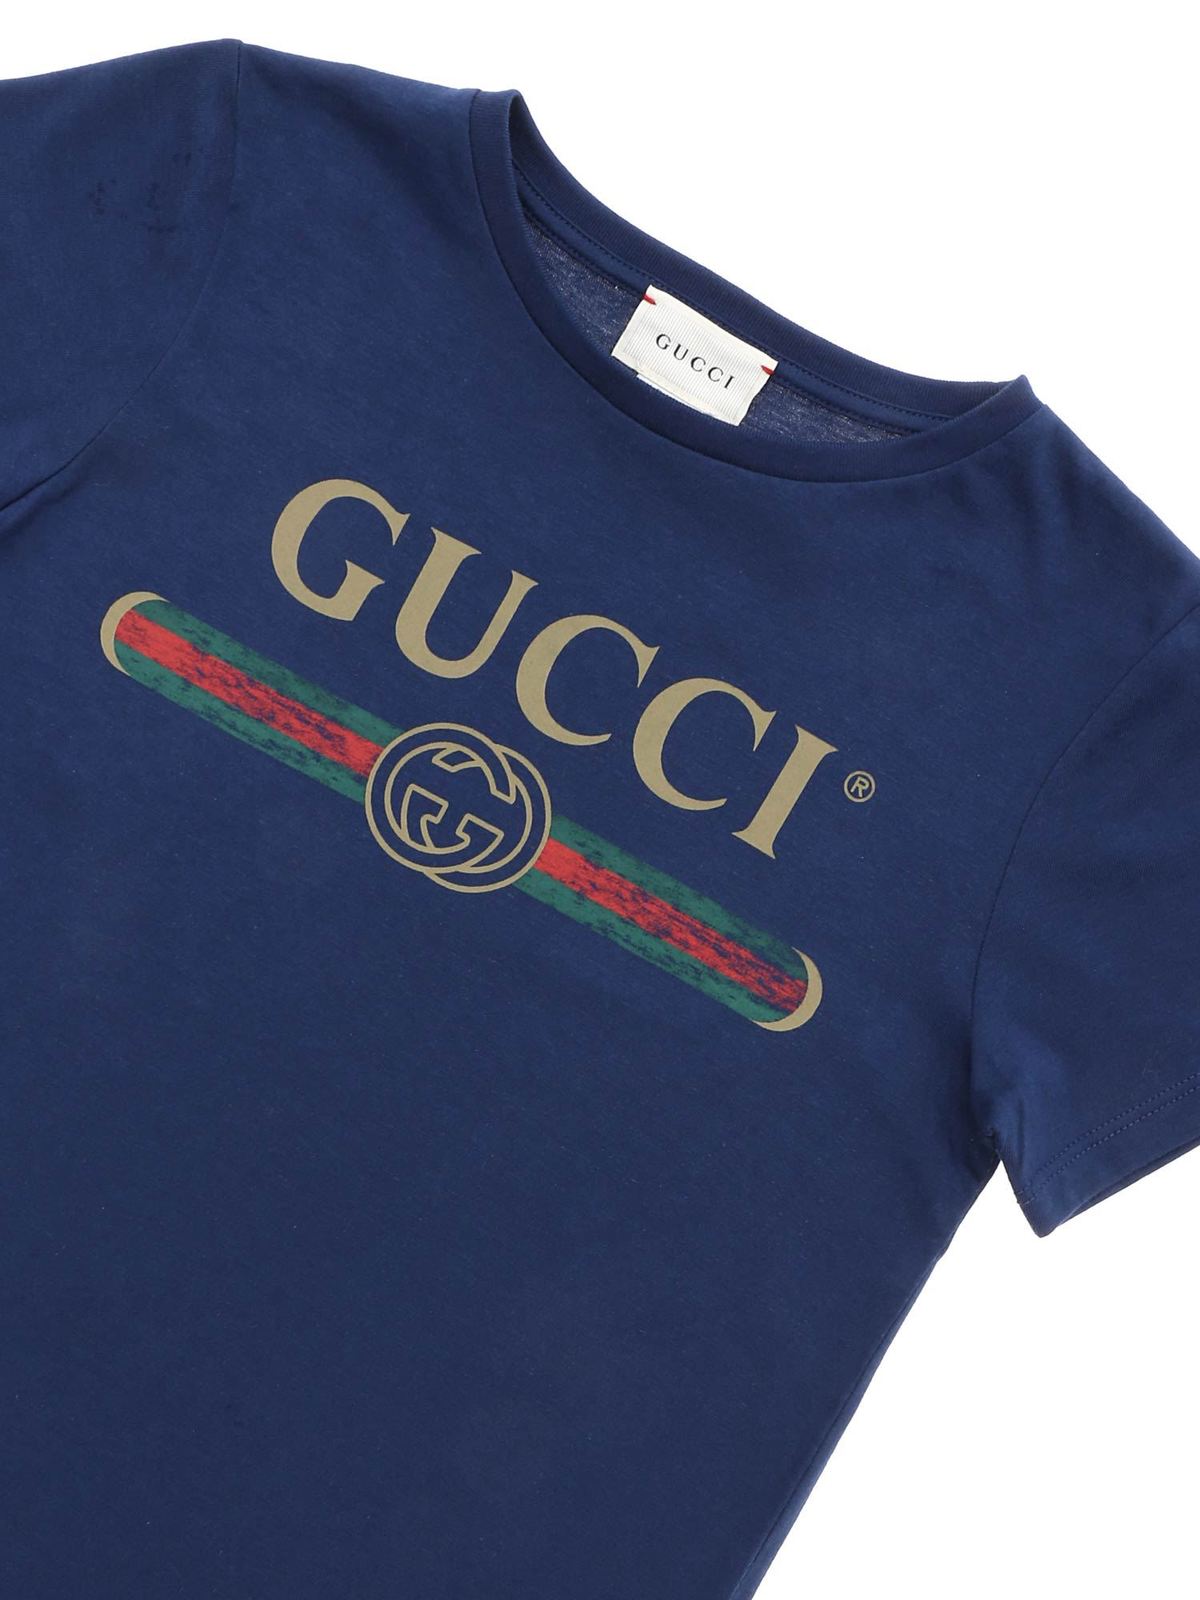 Gucci - Blue T-shirt with contrasting 